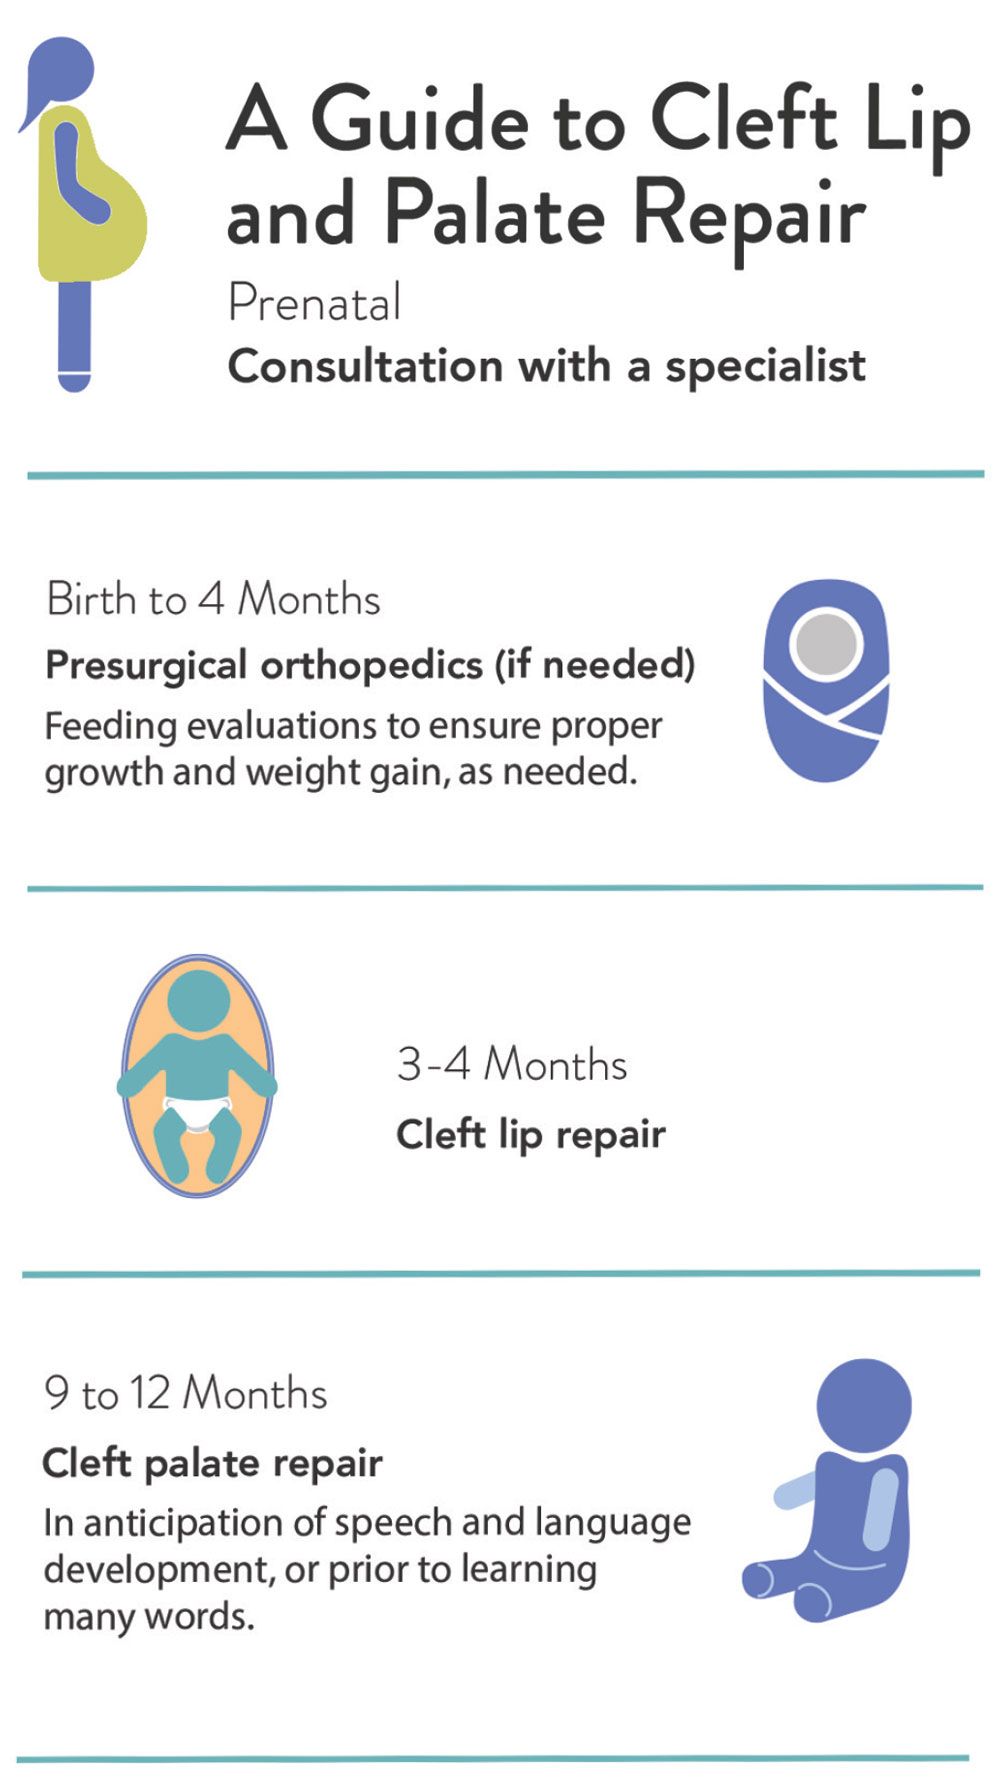 A guide to cleft lip and palate repair